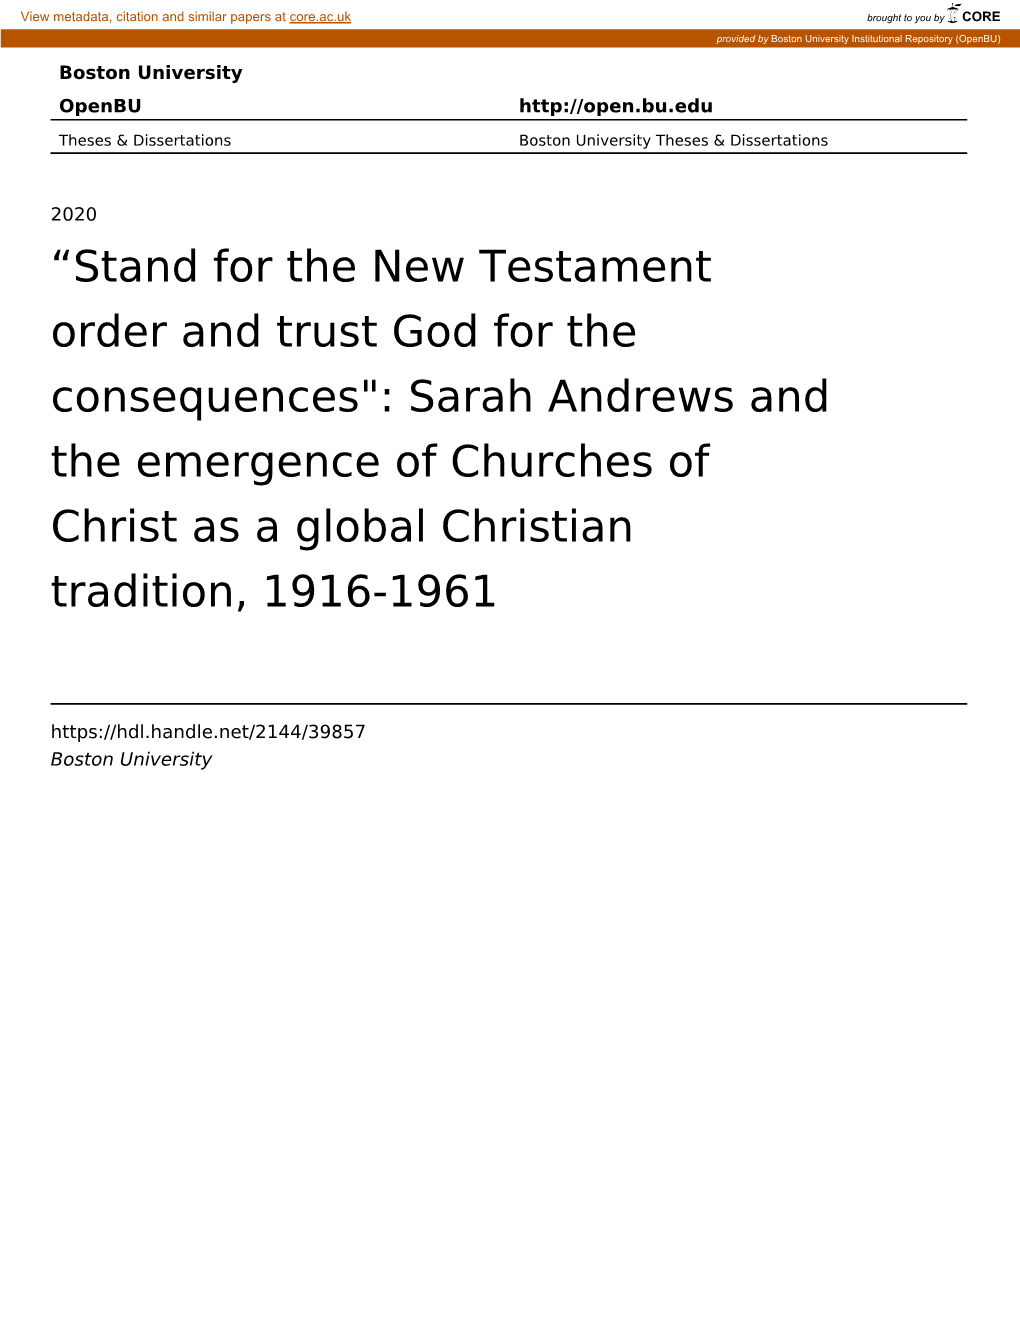 Stand for the New Testament Order and Trust God for the Consequences": Sarah Andrews and the Emergence of Churches of Ch